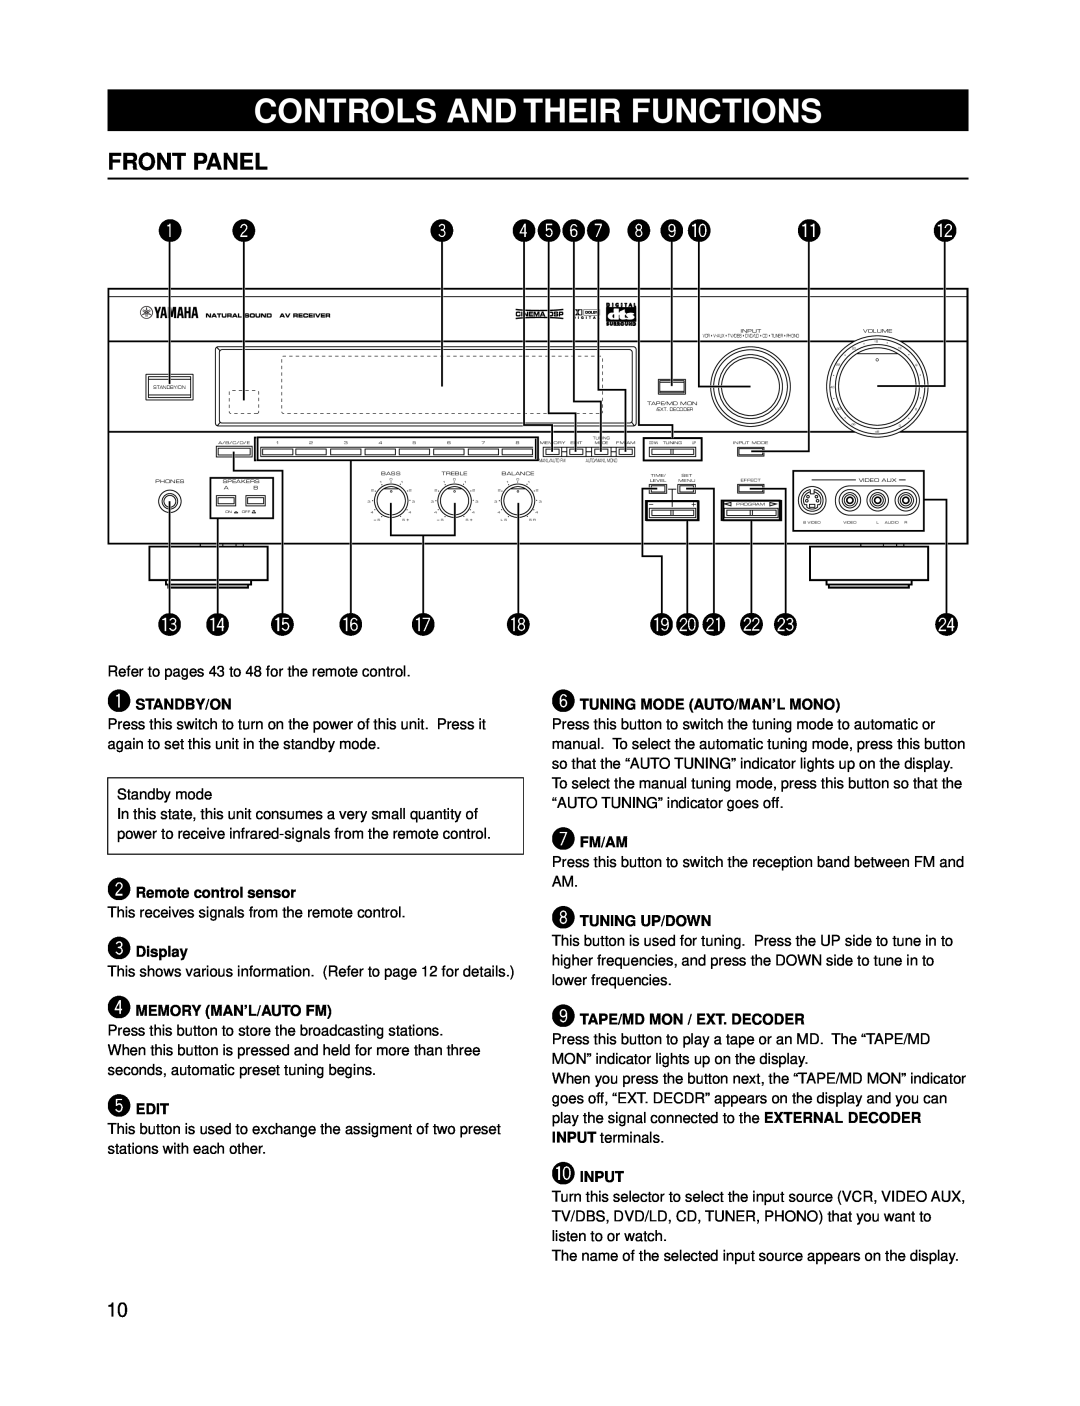 Yamaha RX-V595A owner manual Controls And Their Functions, Front Panel 